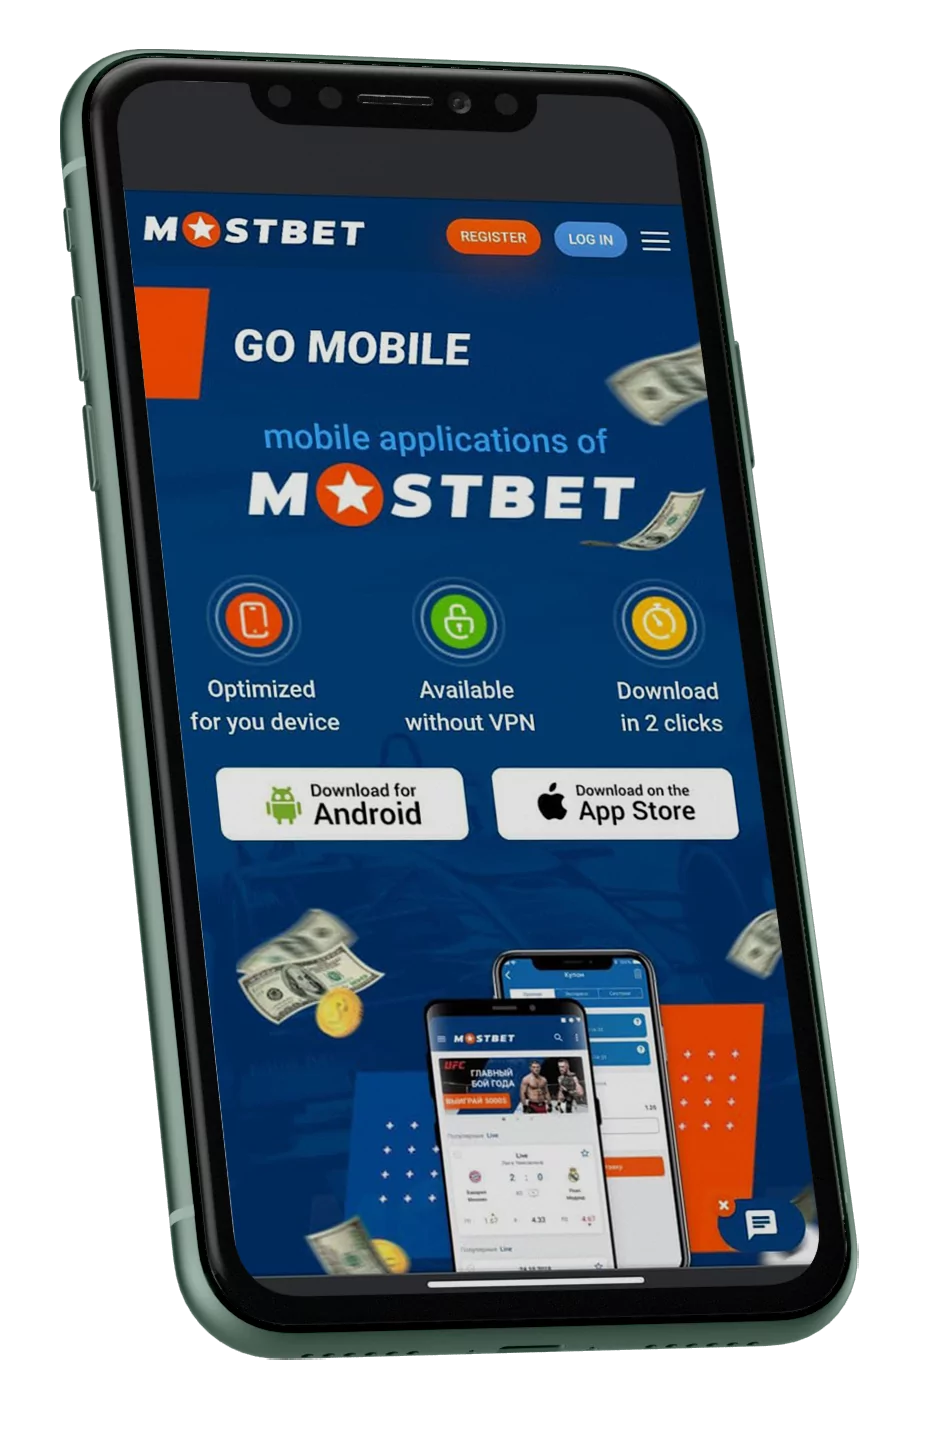 Step 1: Go to the offical website and find mostbet apk file.